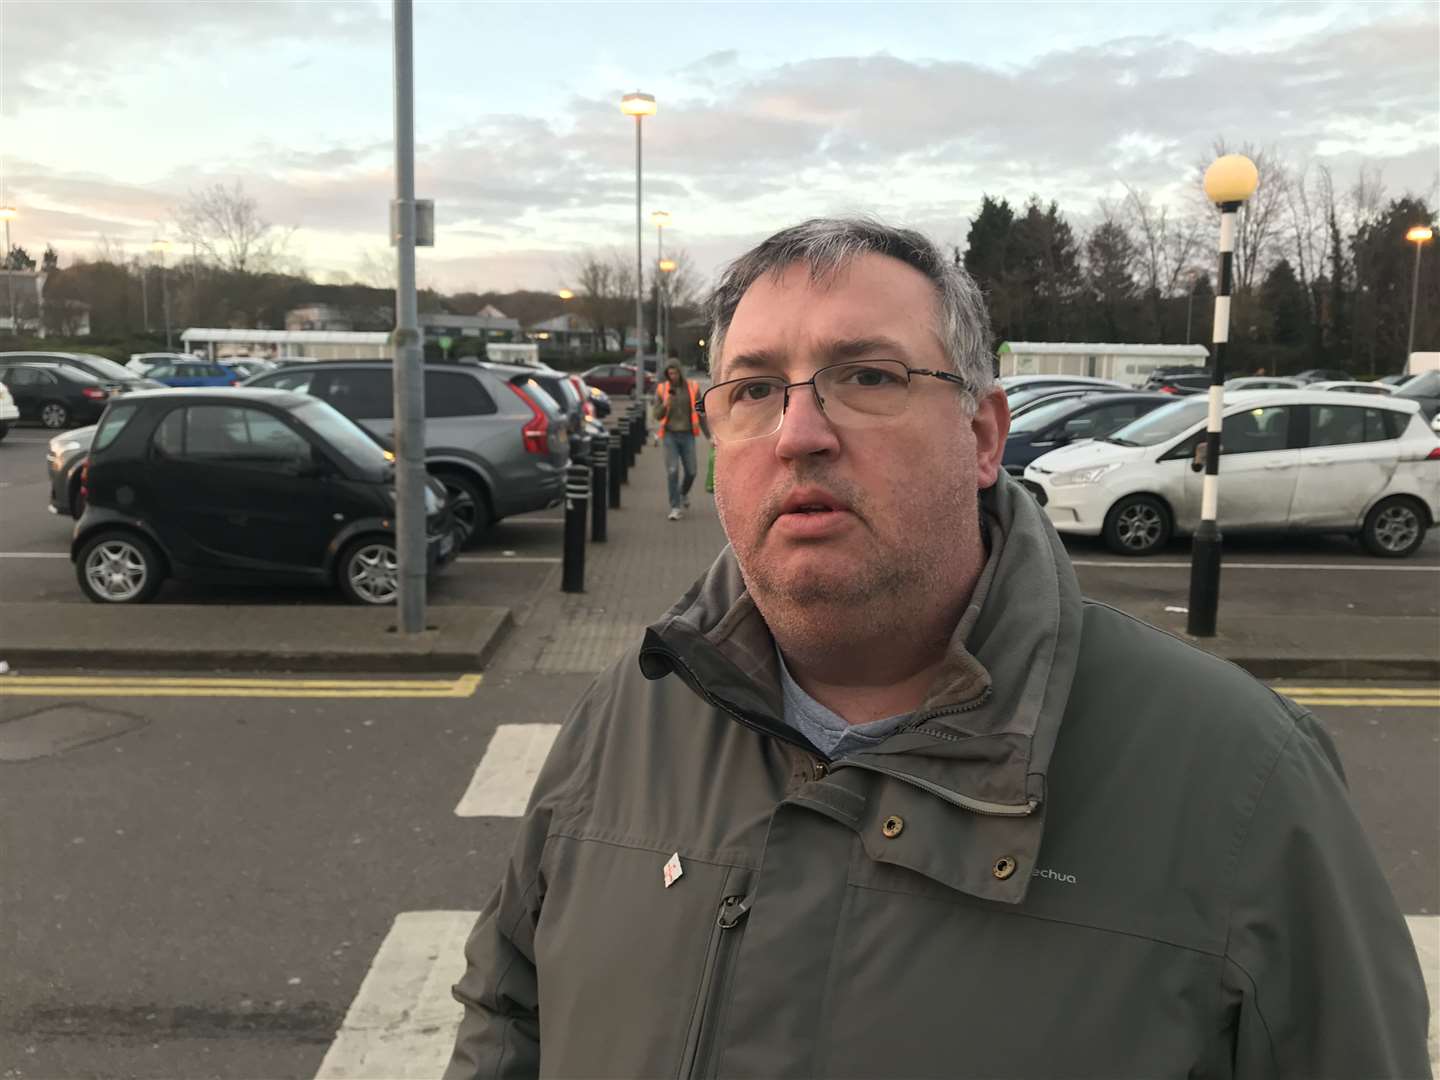 James Barnden estimates that there were as many as 70 people queuing outside Asda at 6am on Wednesday